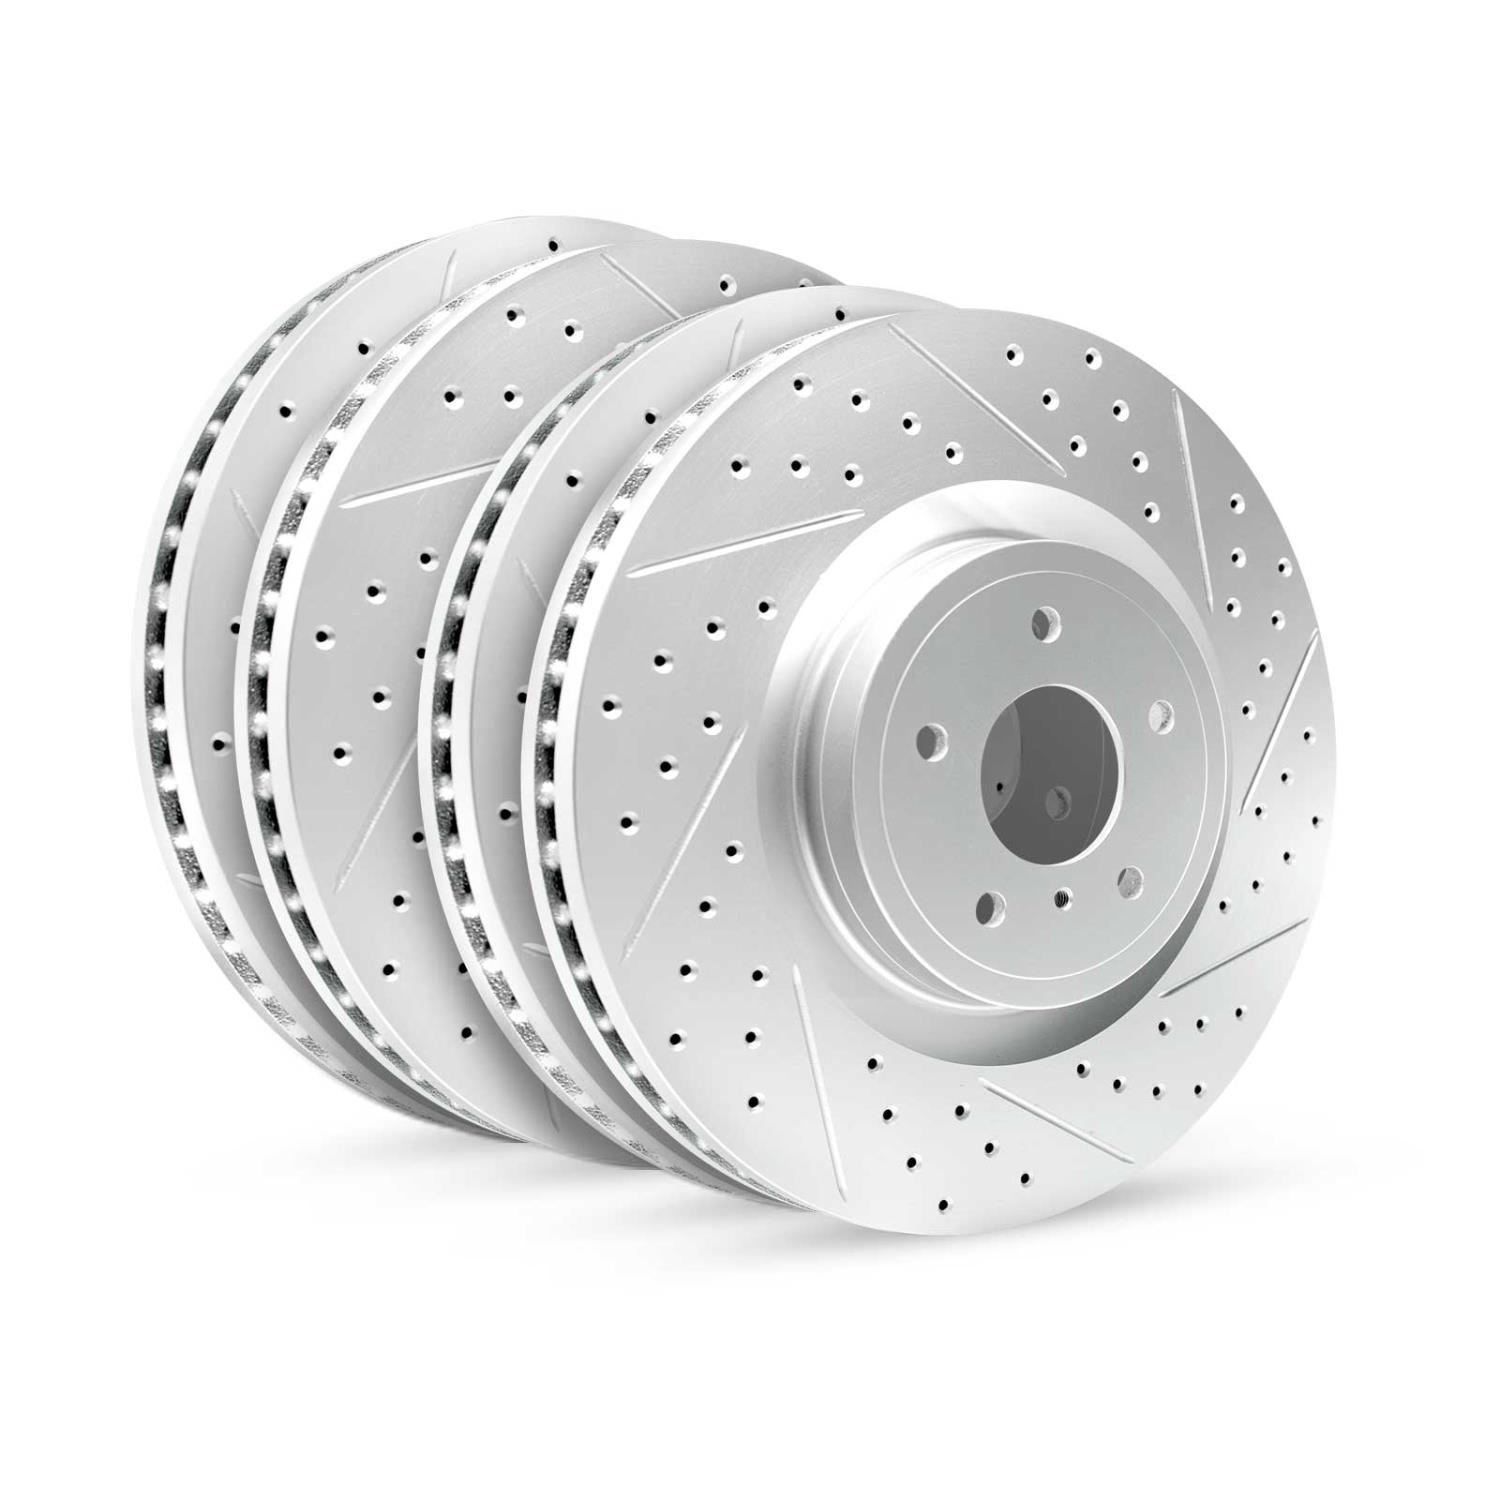 GEO-Carbon Drilled/Slotted Rotors, 1991-1999 Fits Multiple